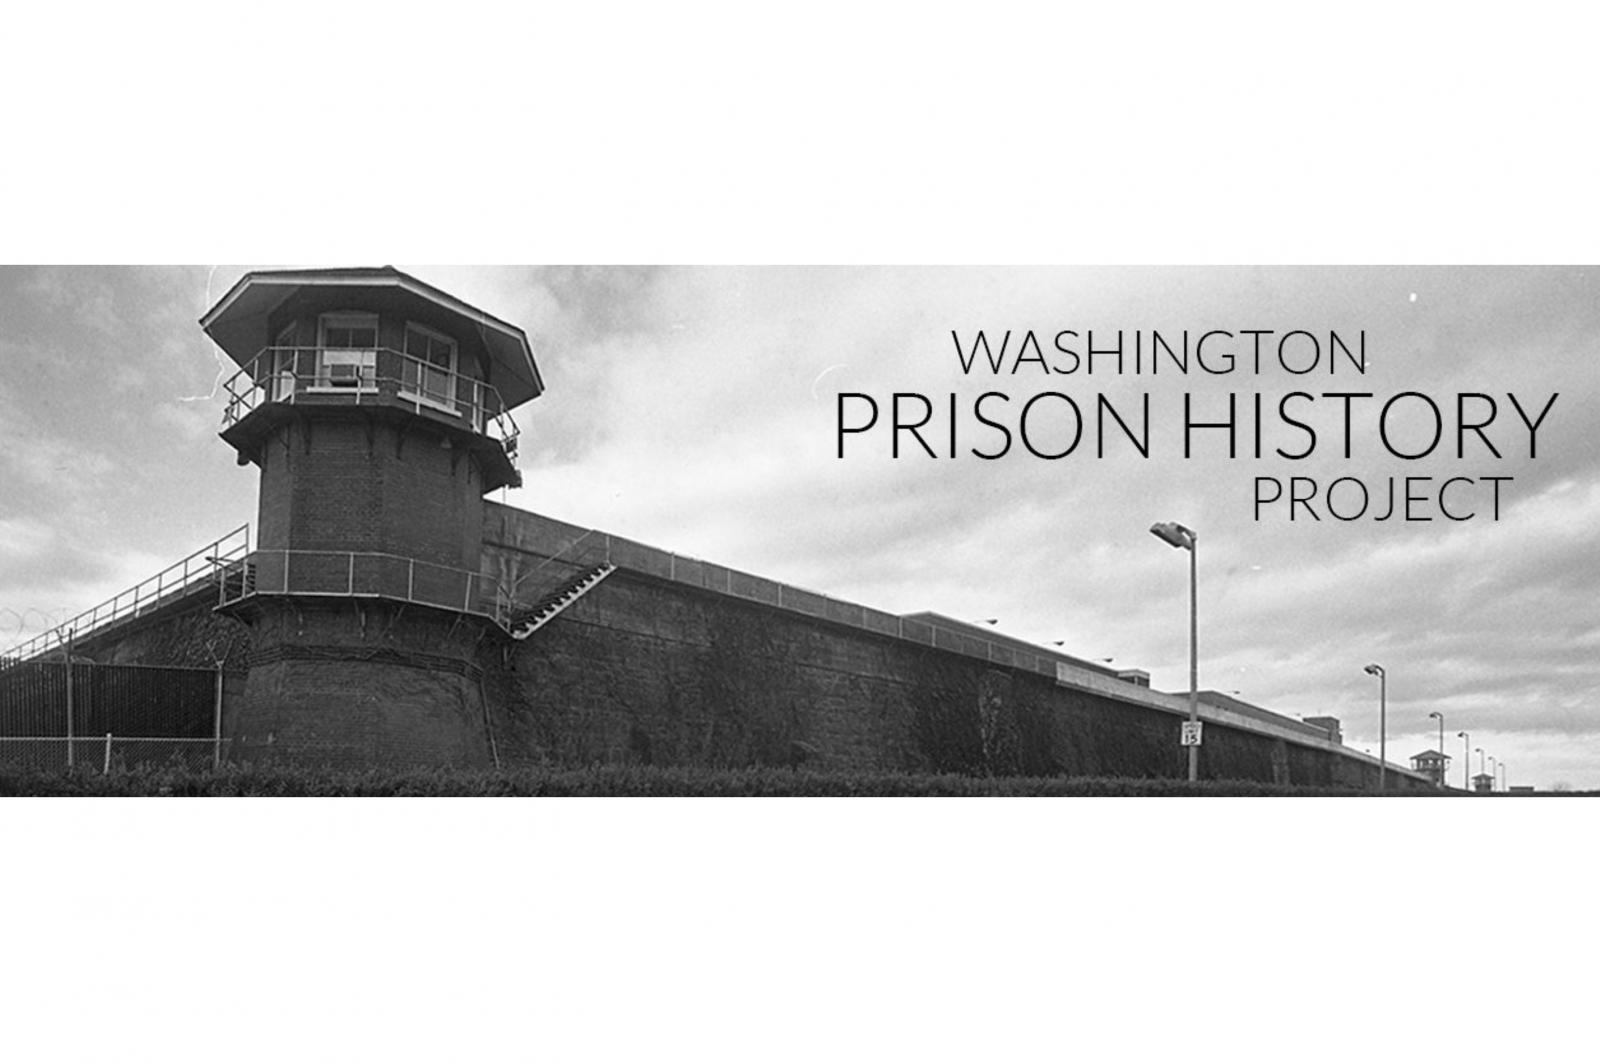 Black and white photo of the guard tower at the Washington State Penitentiary with the text “Washington Prison History Project” over it